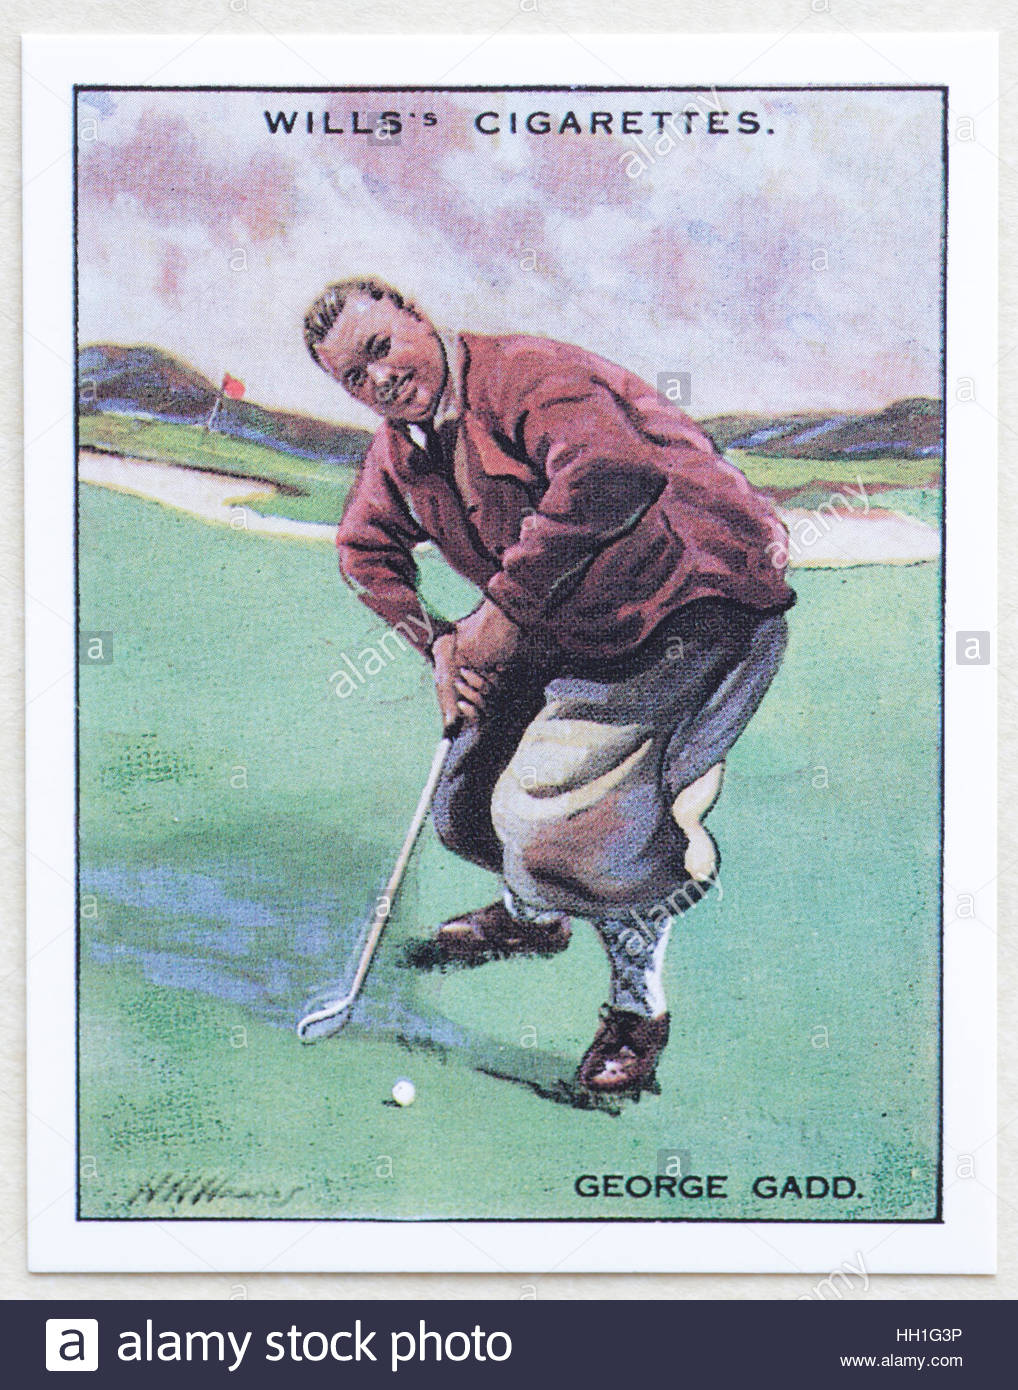 George Gadd - Famous Golfers, cigarette cards issued in 1930 by W.D.& H.O. Wills cigarettes. Stock Photo